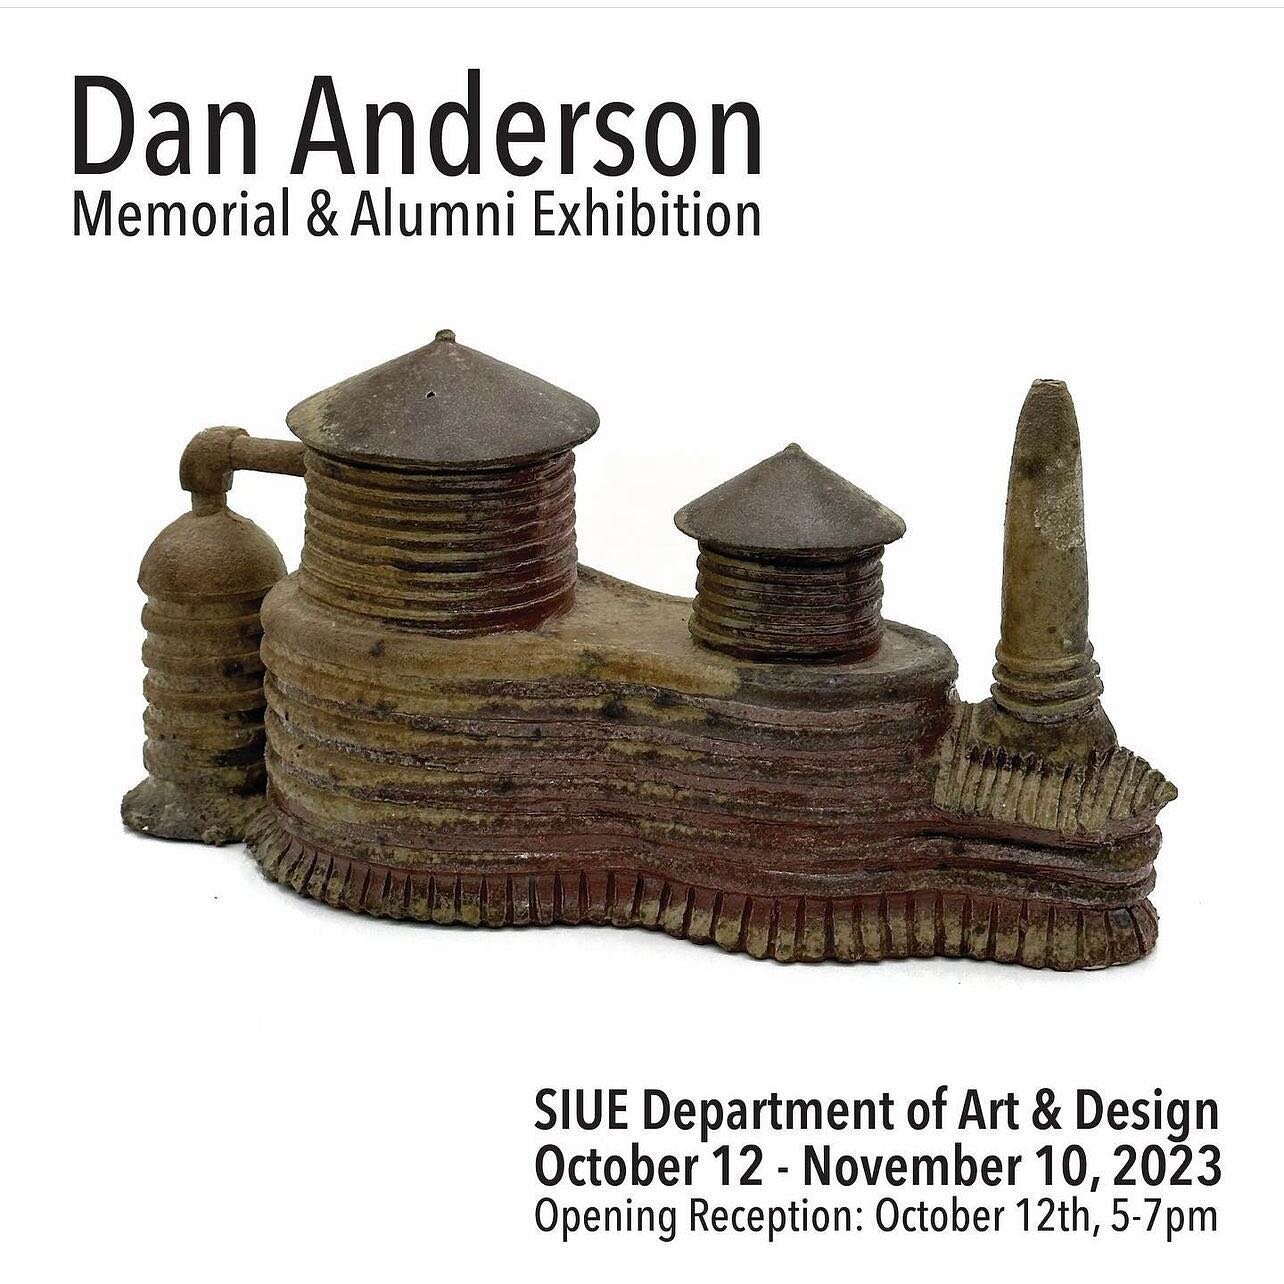 Something you may not know is that many moons ago, long before I became a painter, I earned my BFA in ceramics at SIUE under the amazing clay program that @louieseven.7 spent so many years building. 

As his memorial retrospective show comes to life 